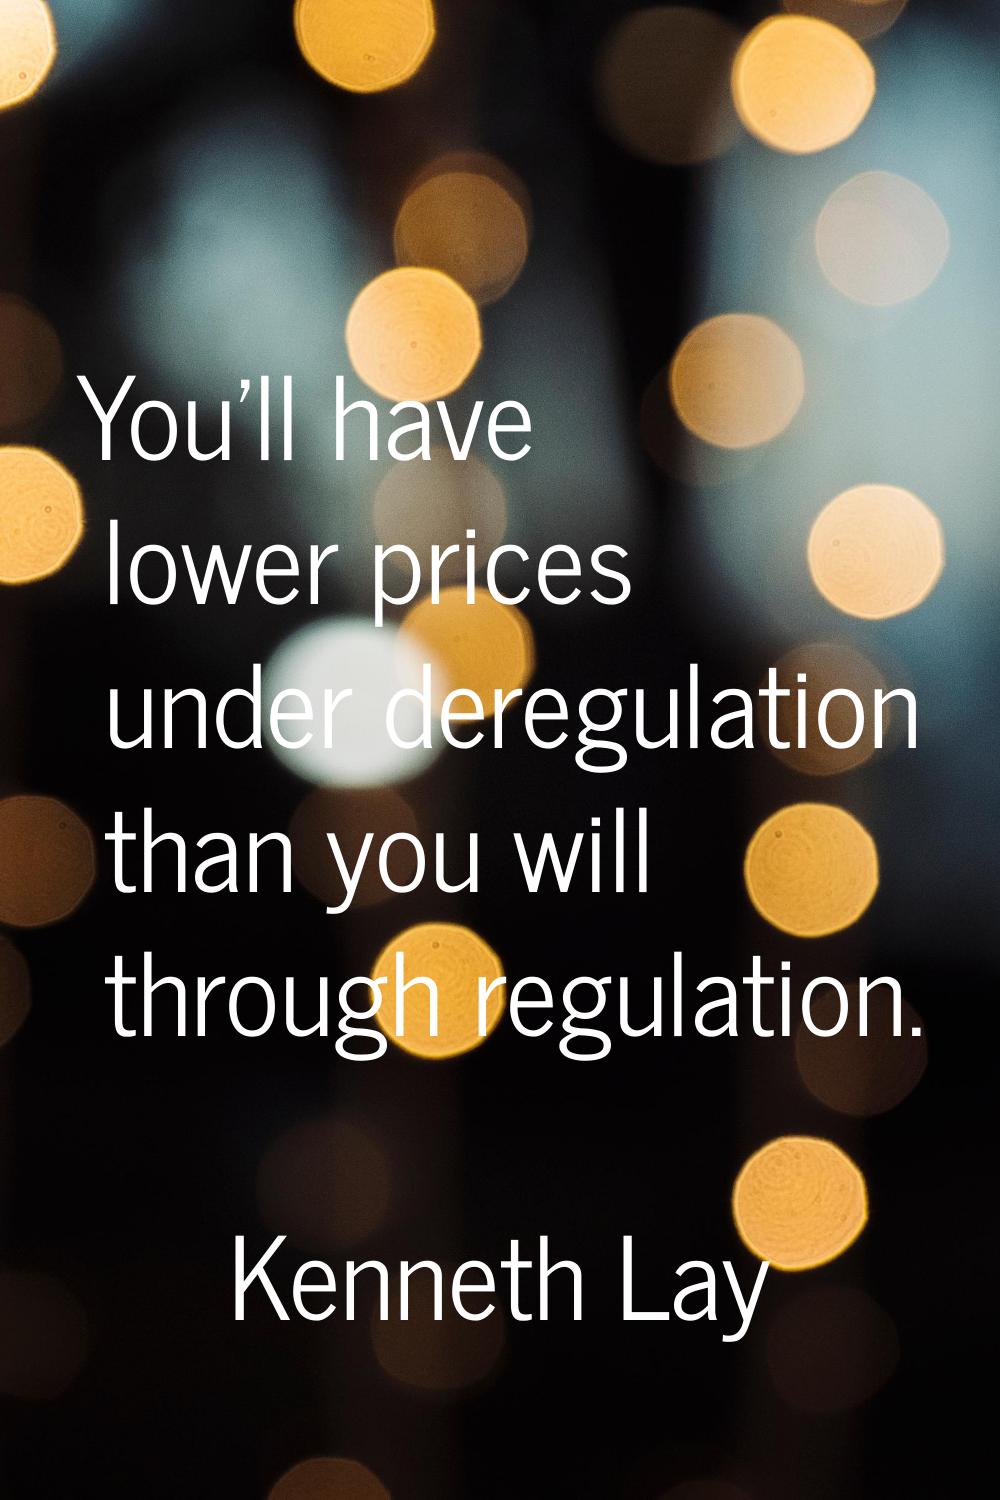 You'll have lower prices under deregulation than you will through regulation.